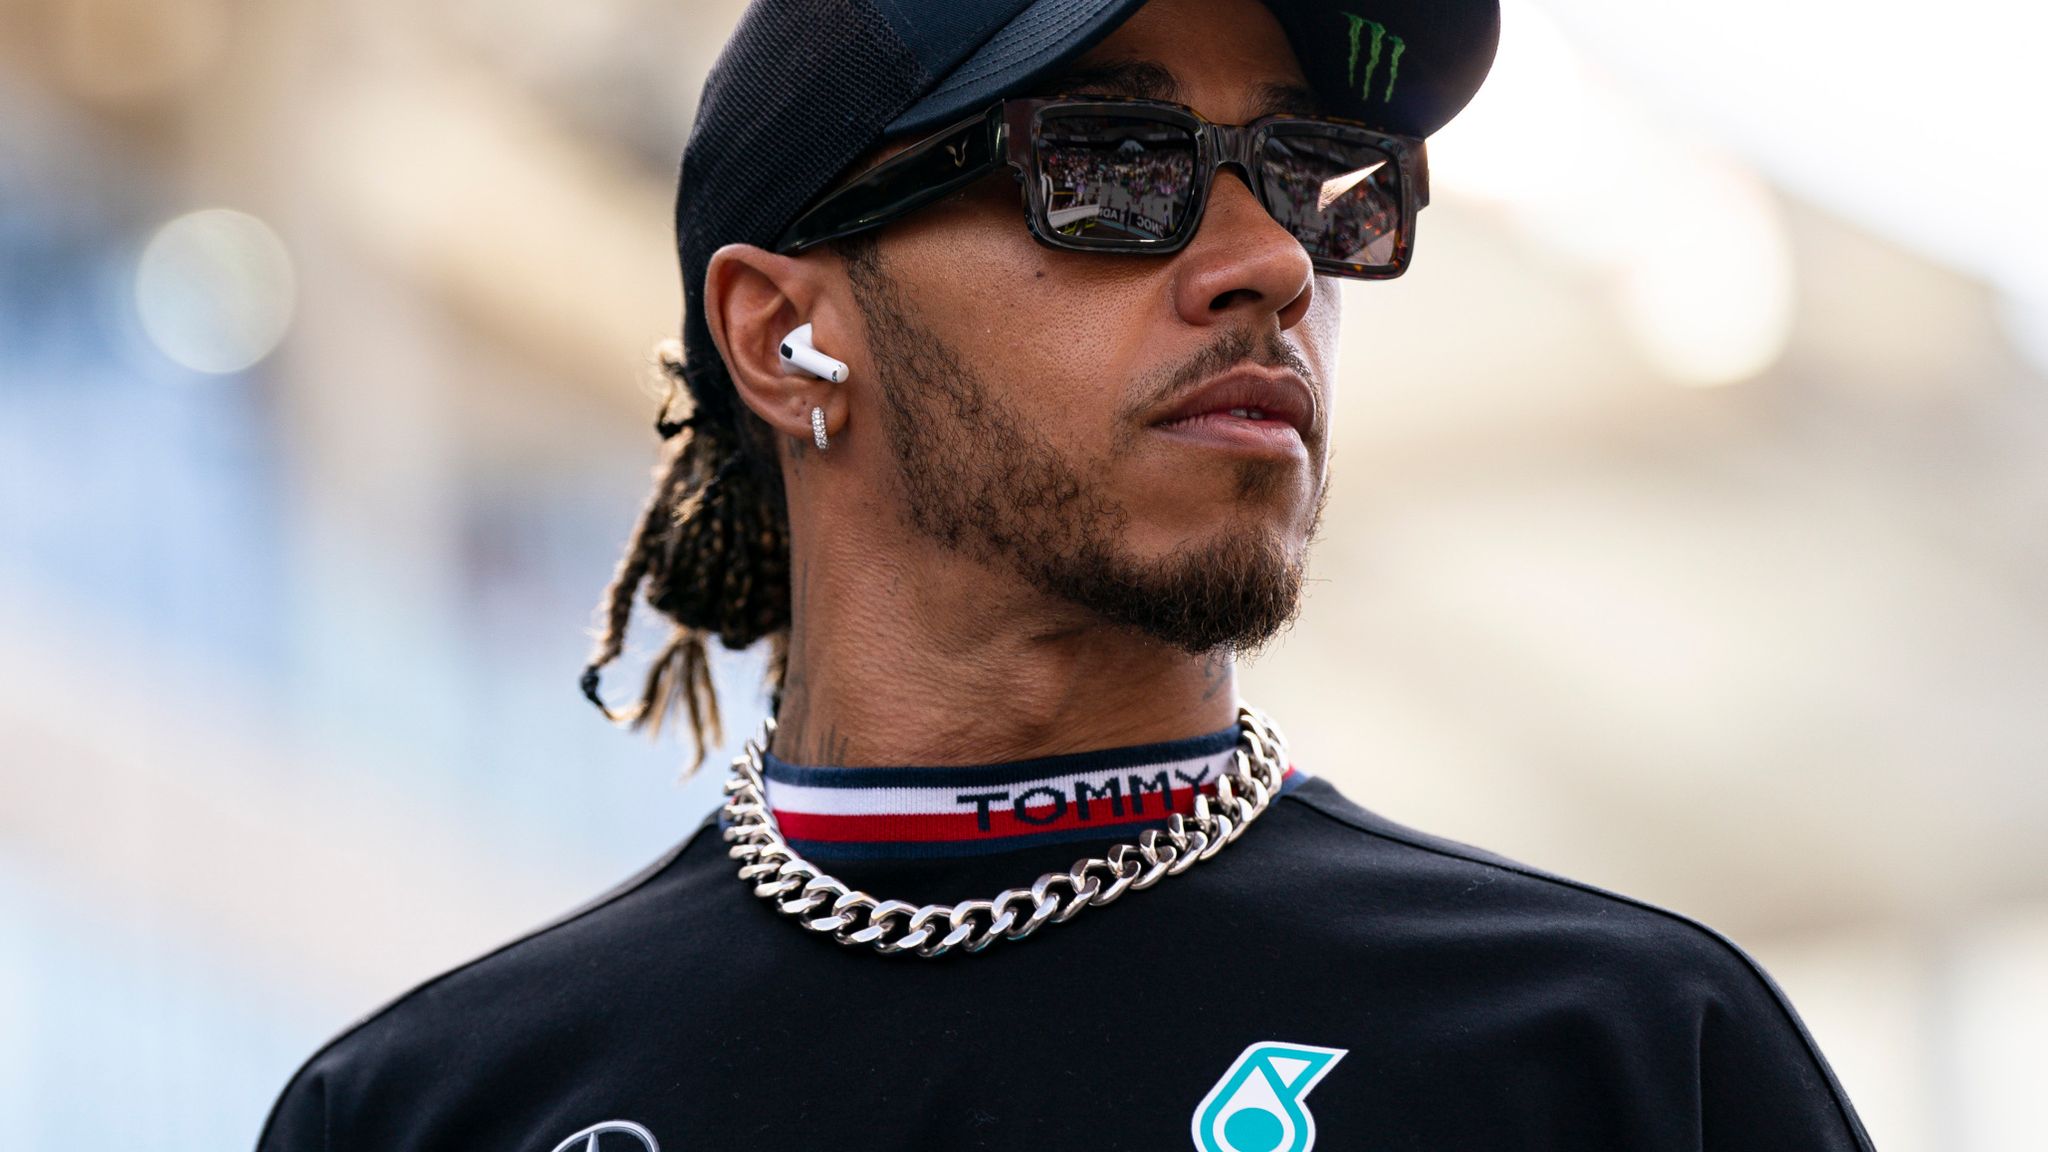 Top 10 Formula One Drivers of 2023